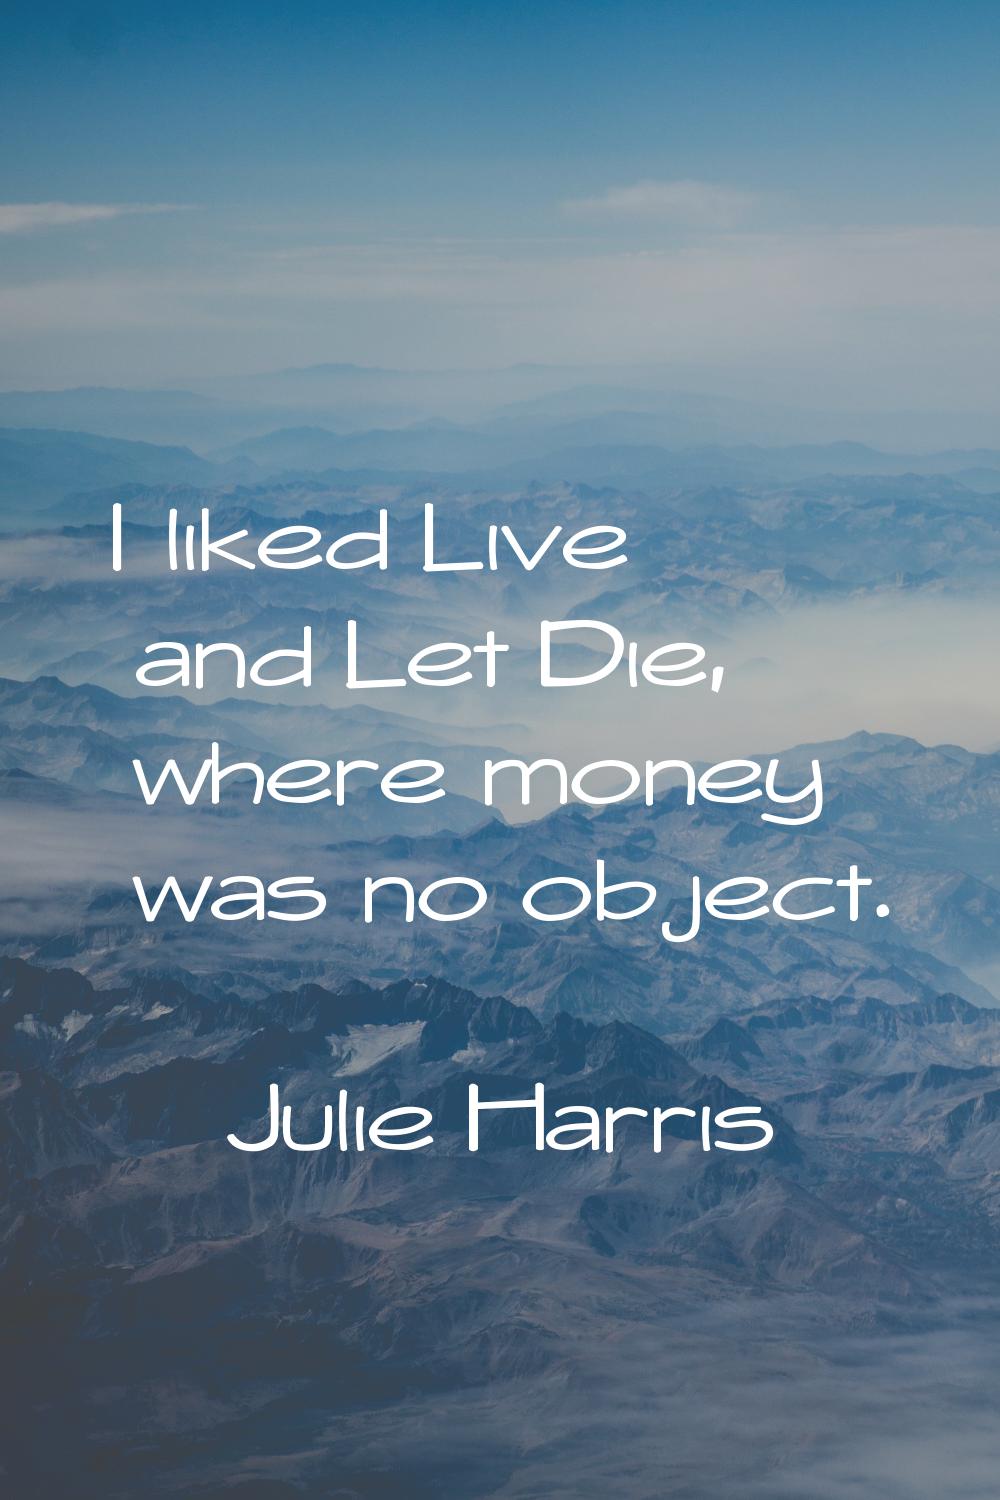 I liked Live and Let Die, where money was no object.